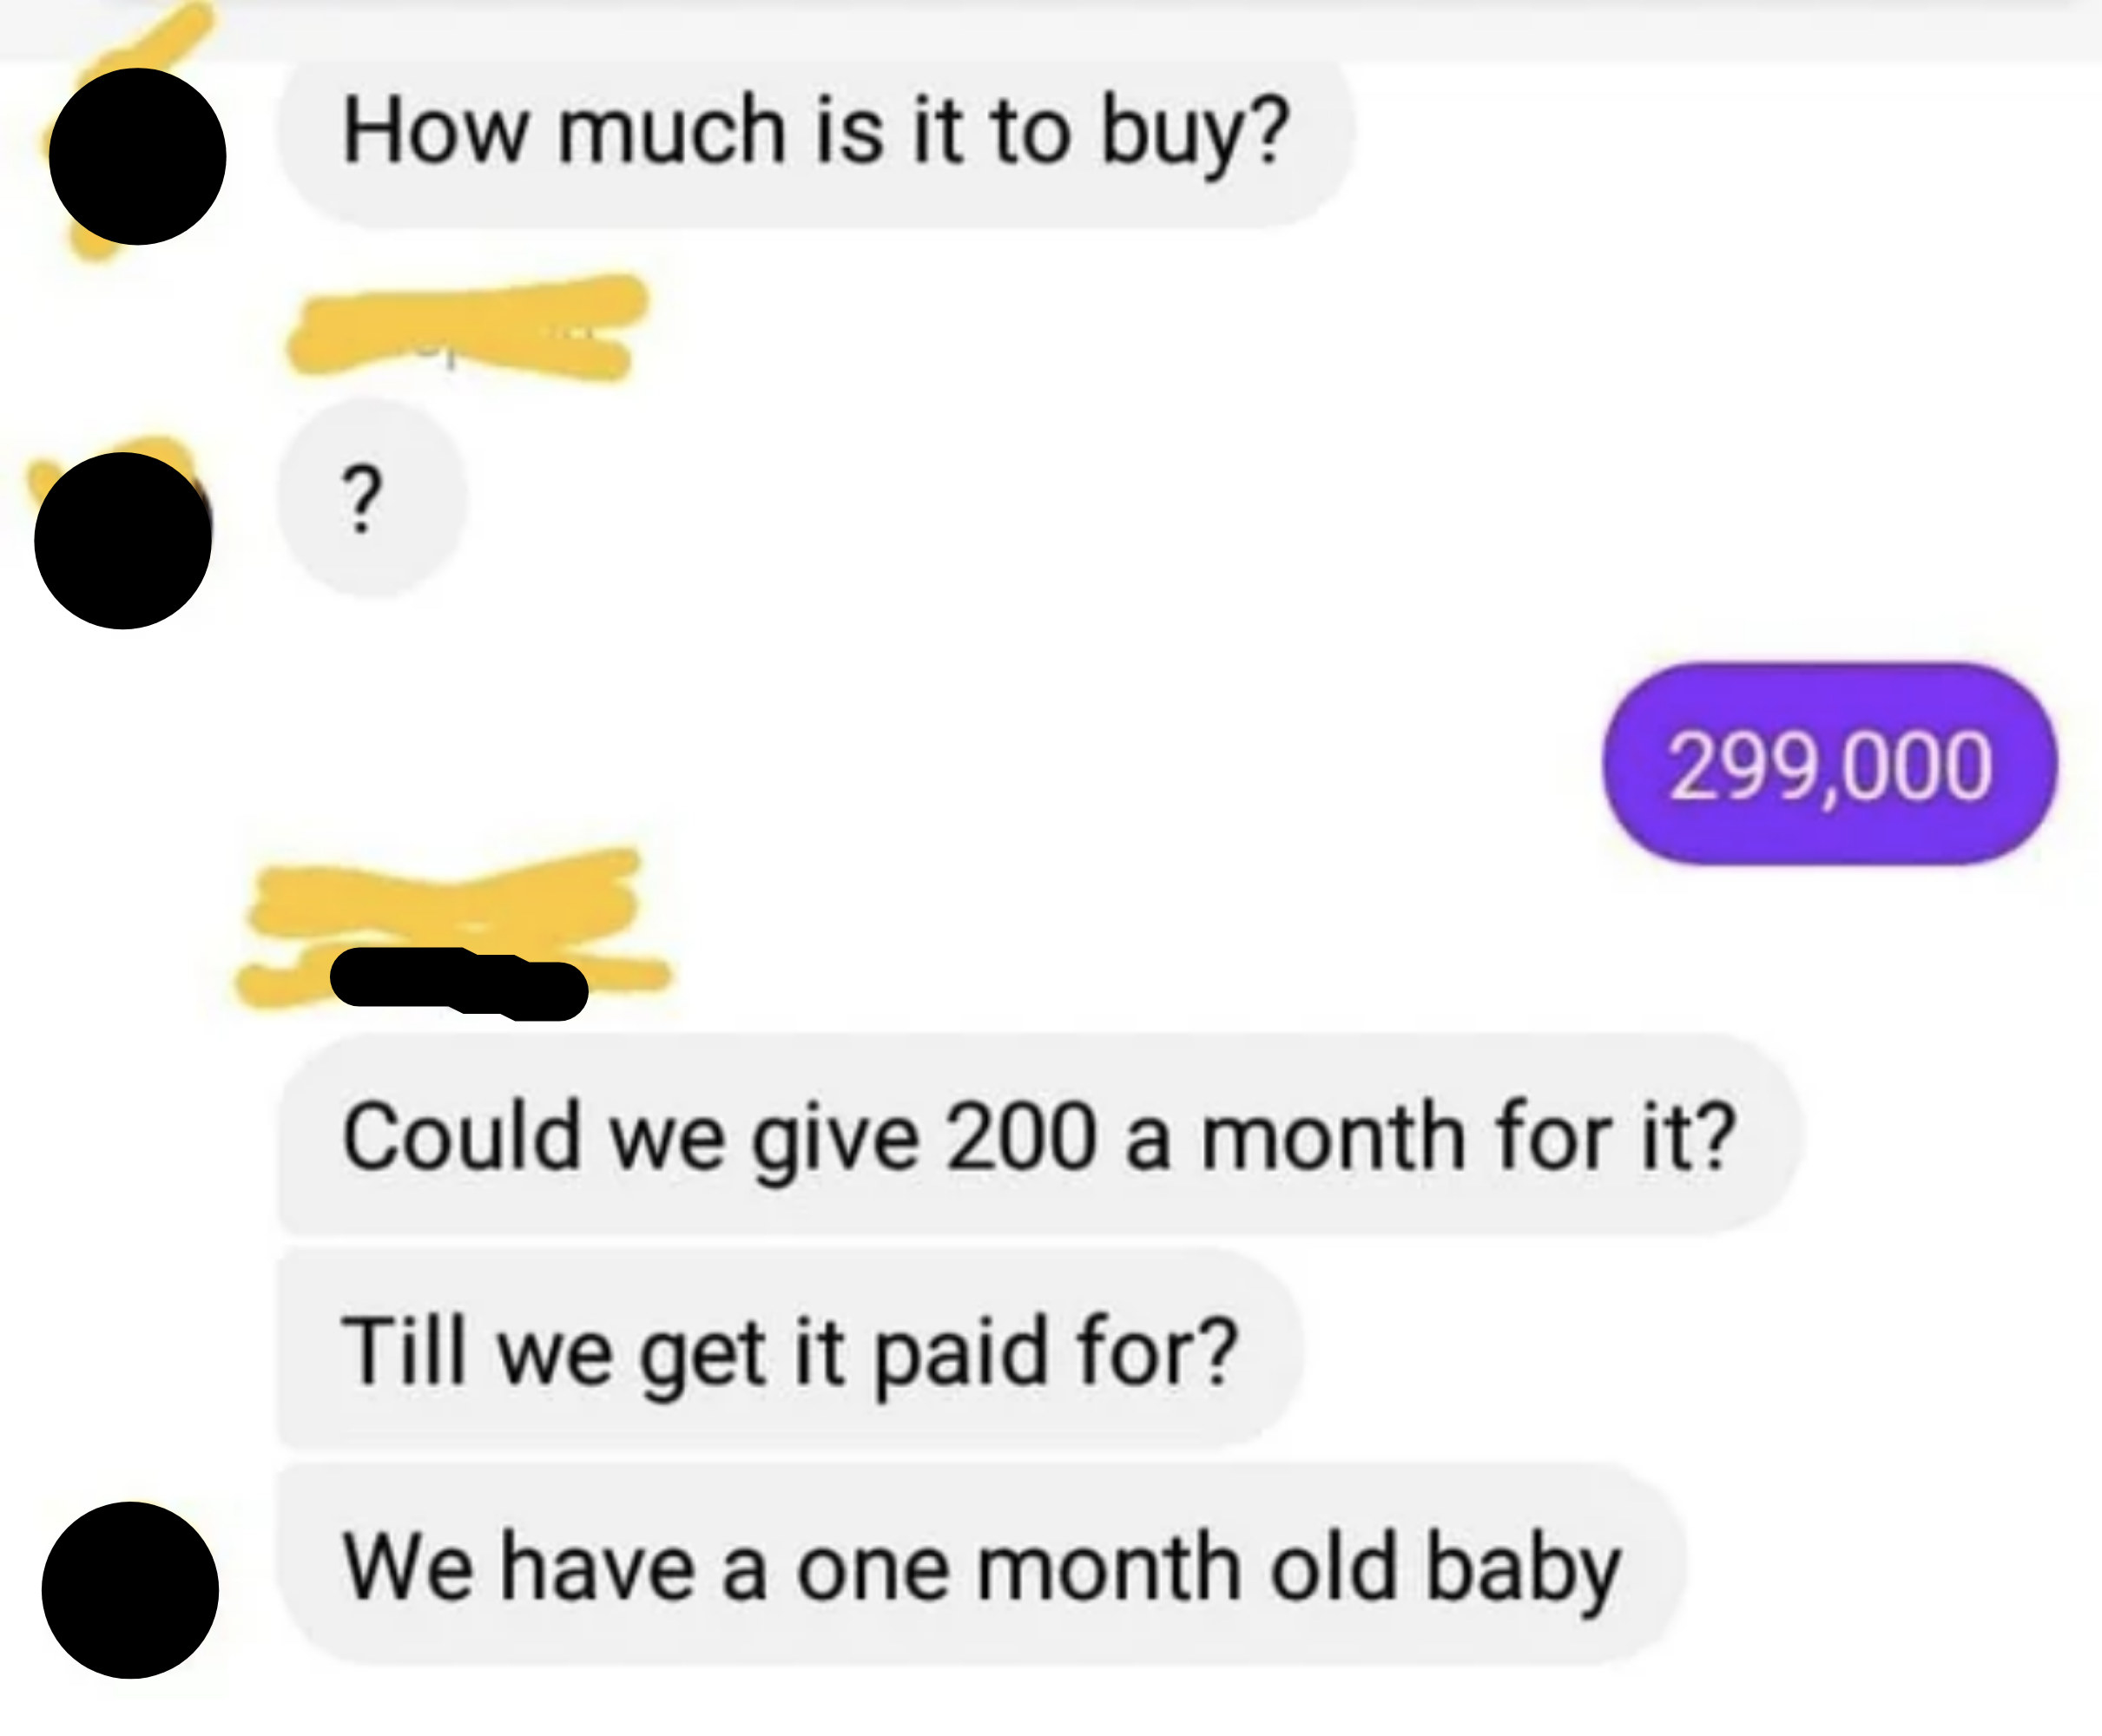 &quot;Could we give 200 a month for it?&quot;